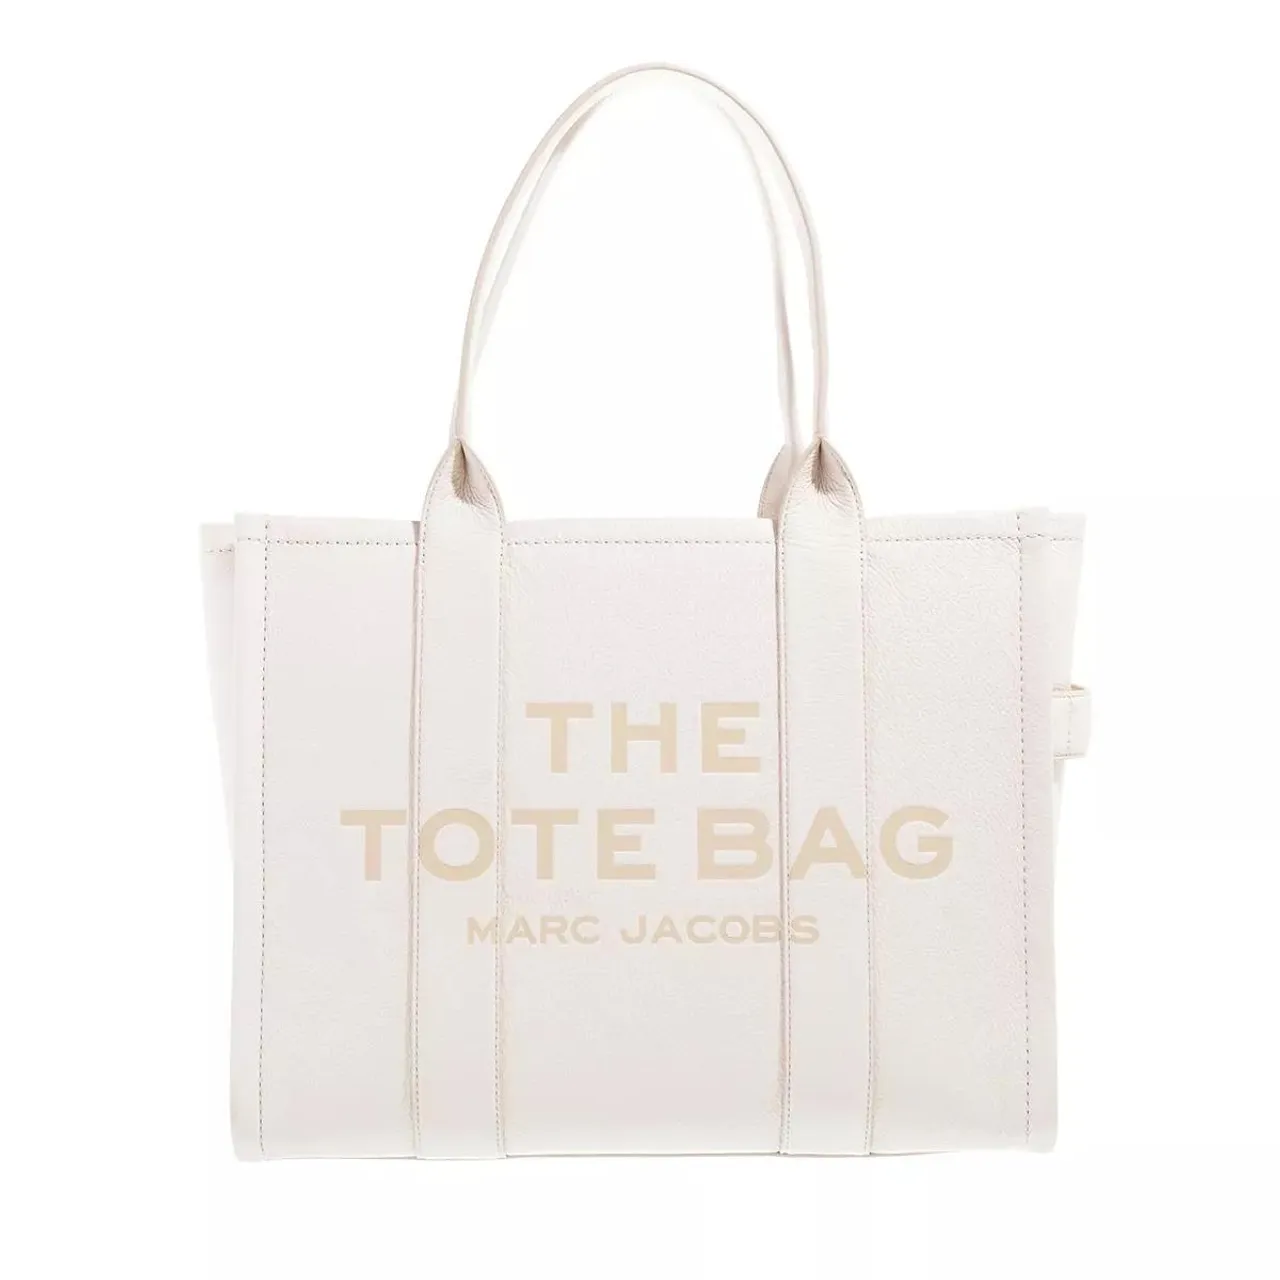 Marc Jacobs Tote Bags - The Large Tote - creme - Tote Bags for ladies